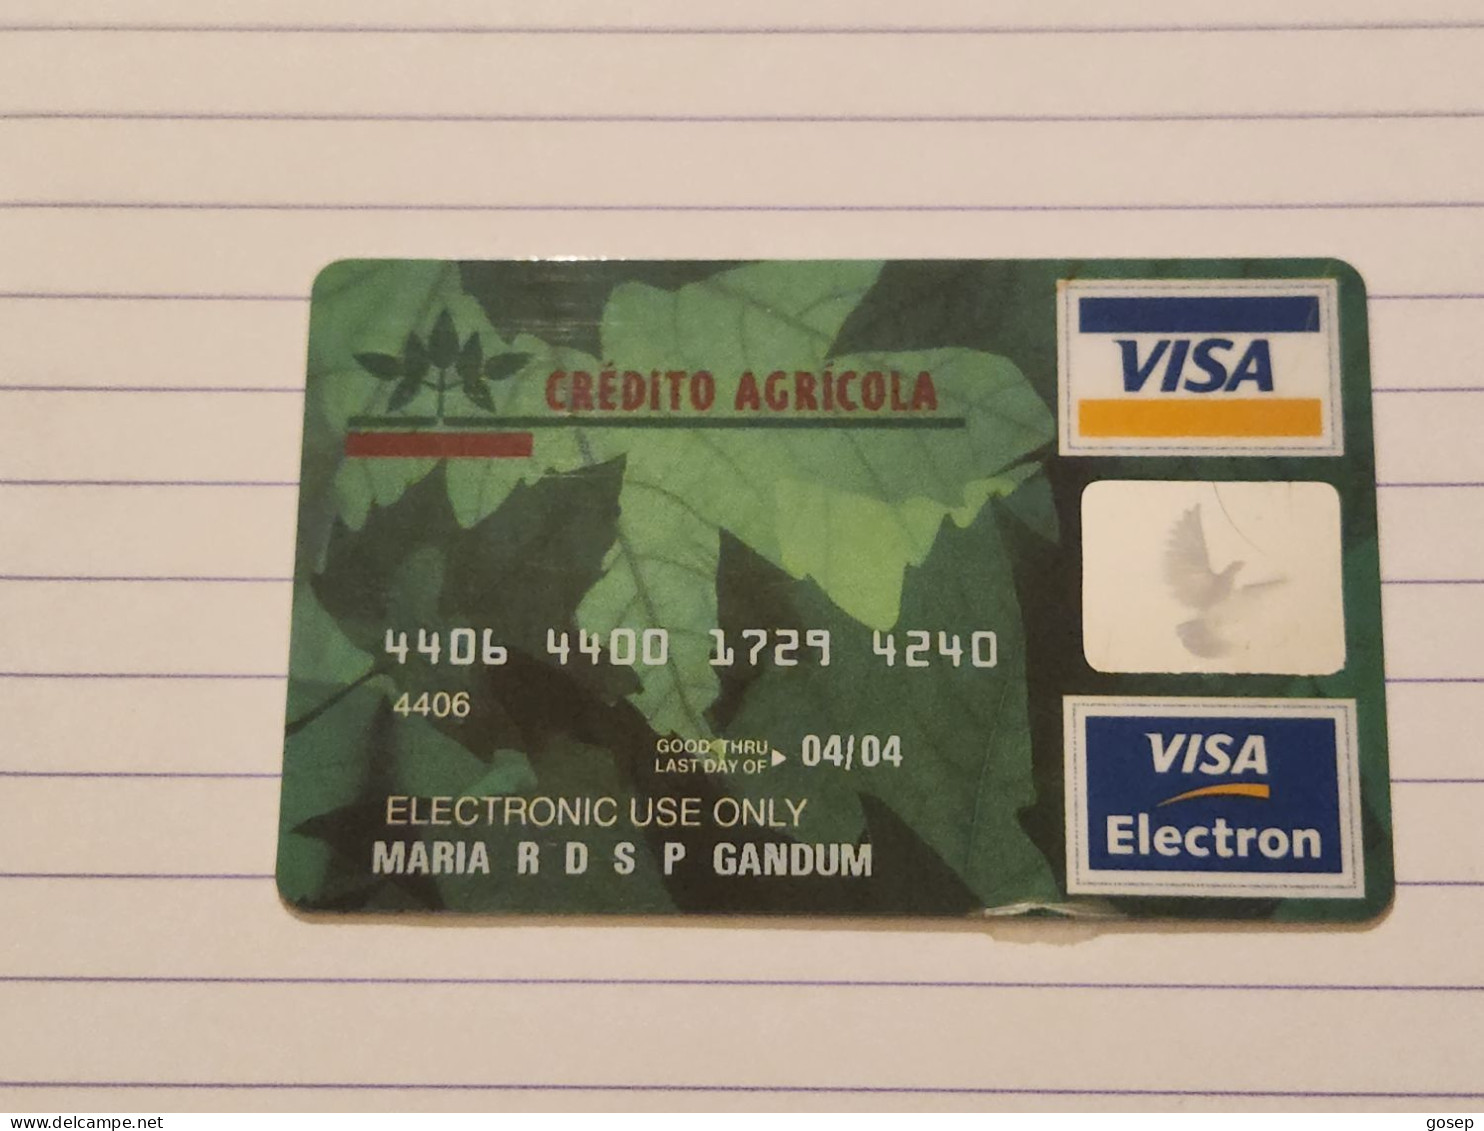 PORTUGAL-CREDITO AGRICOLA--(4406-4400-1729-4240)-(04/04)-(VISA ELECTRON) - Credit Cards (Exp. Date Min. 10 Years)